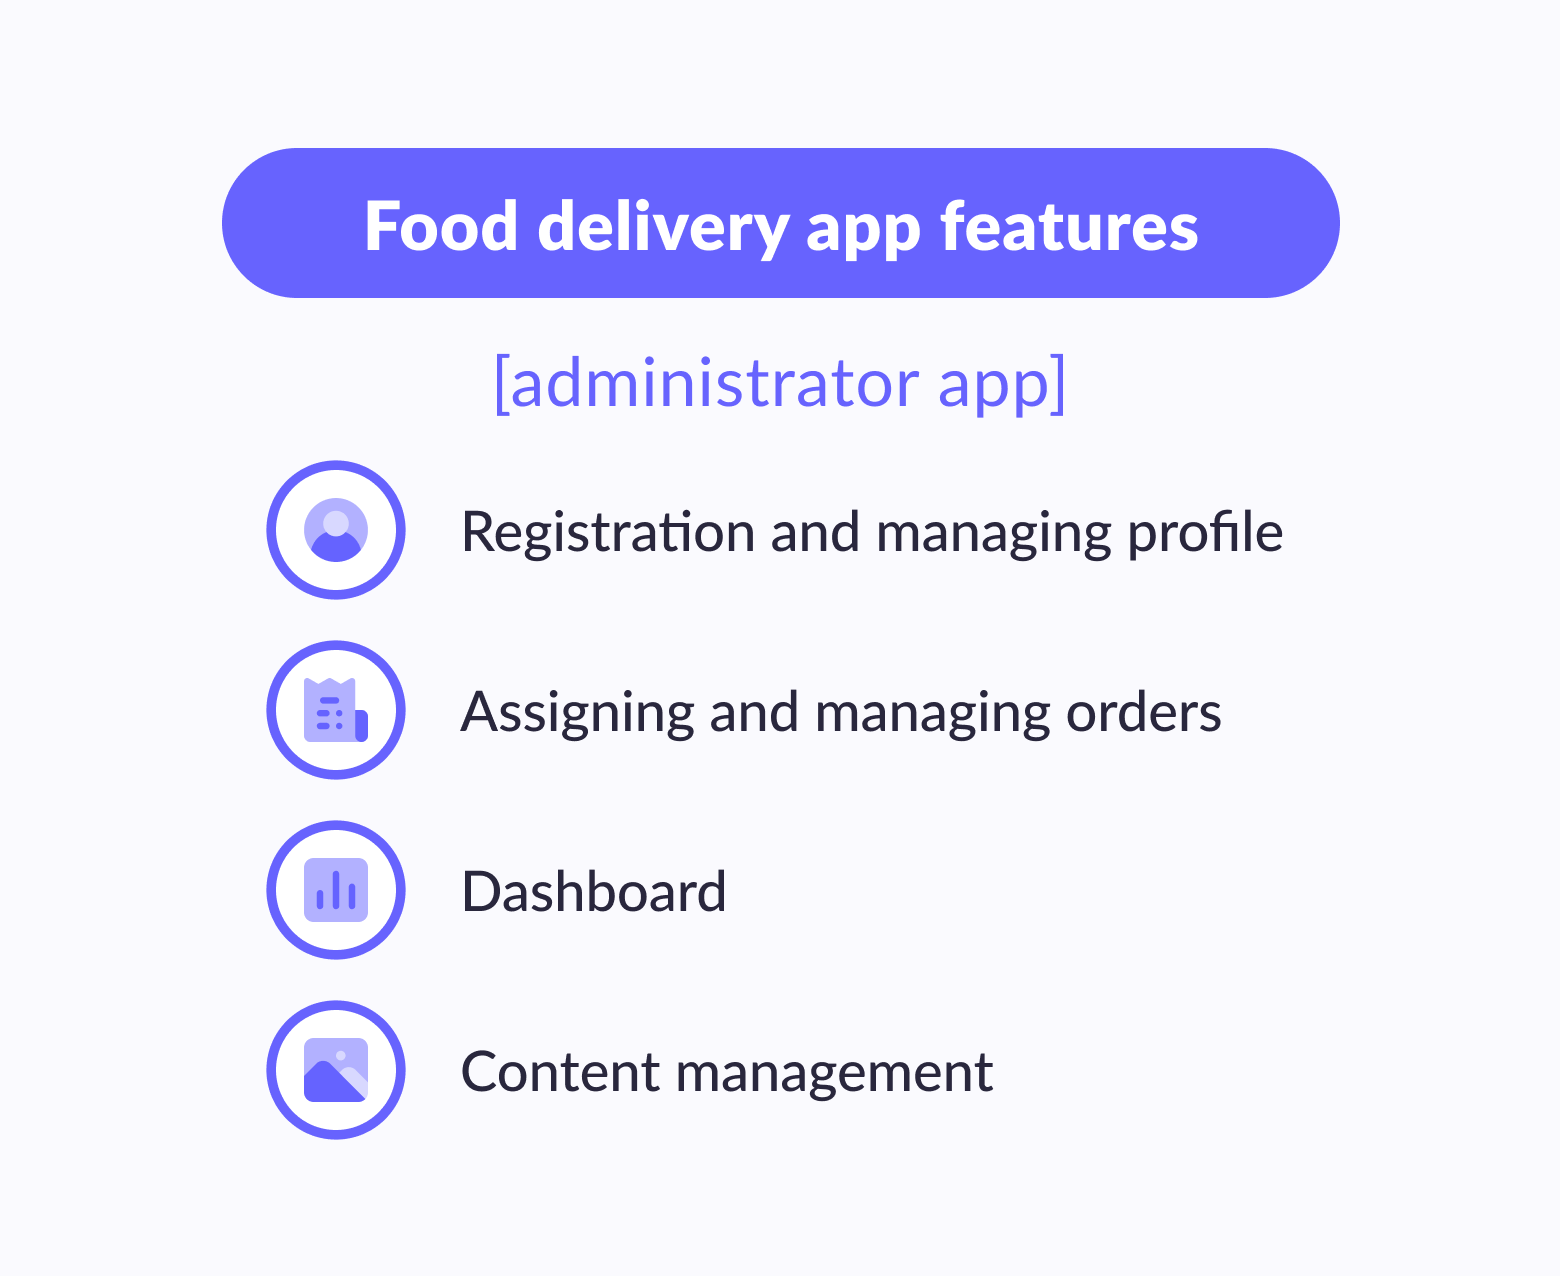 Food delivery app features of the administrator app